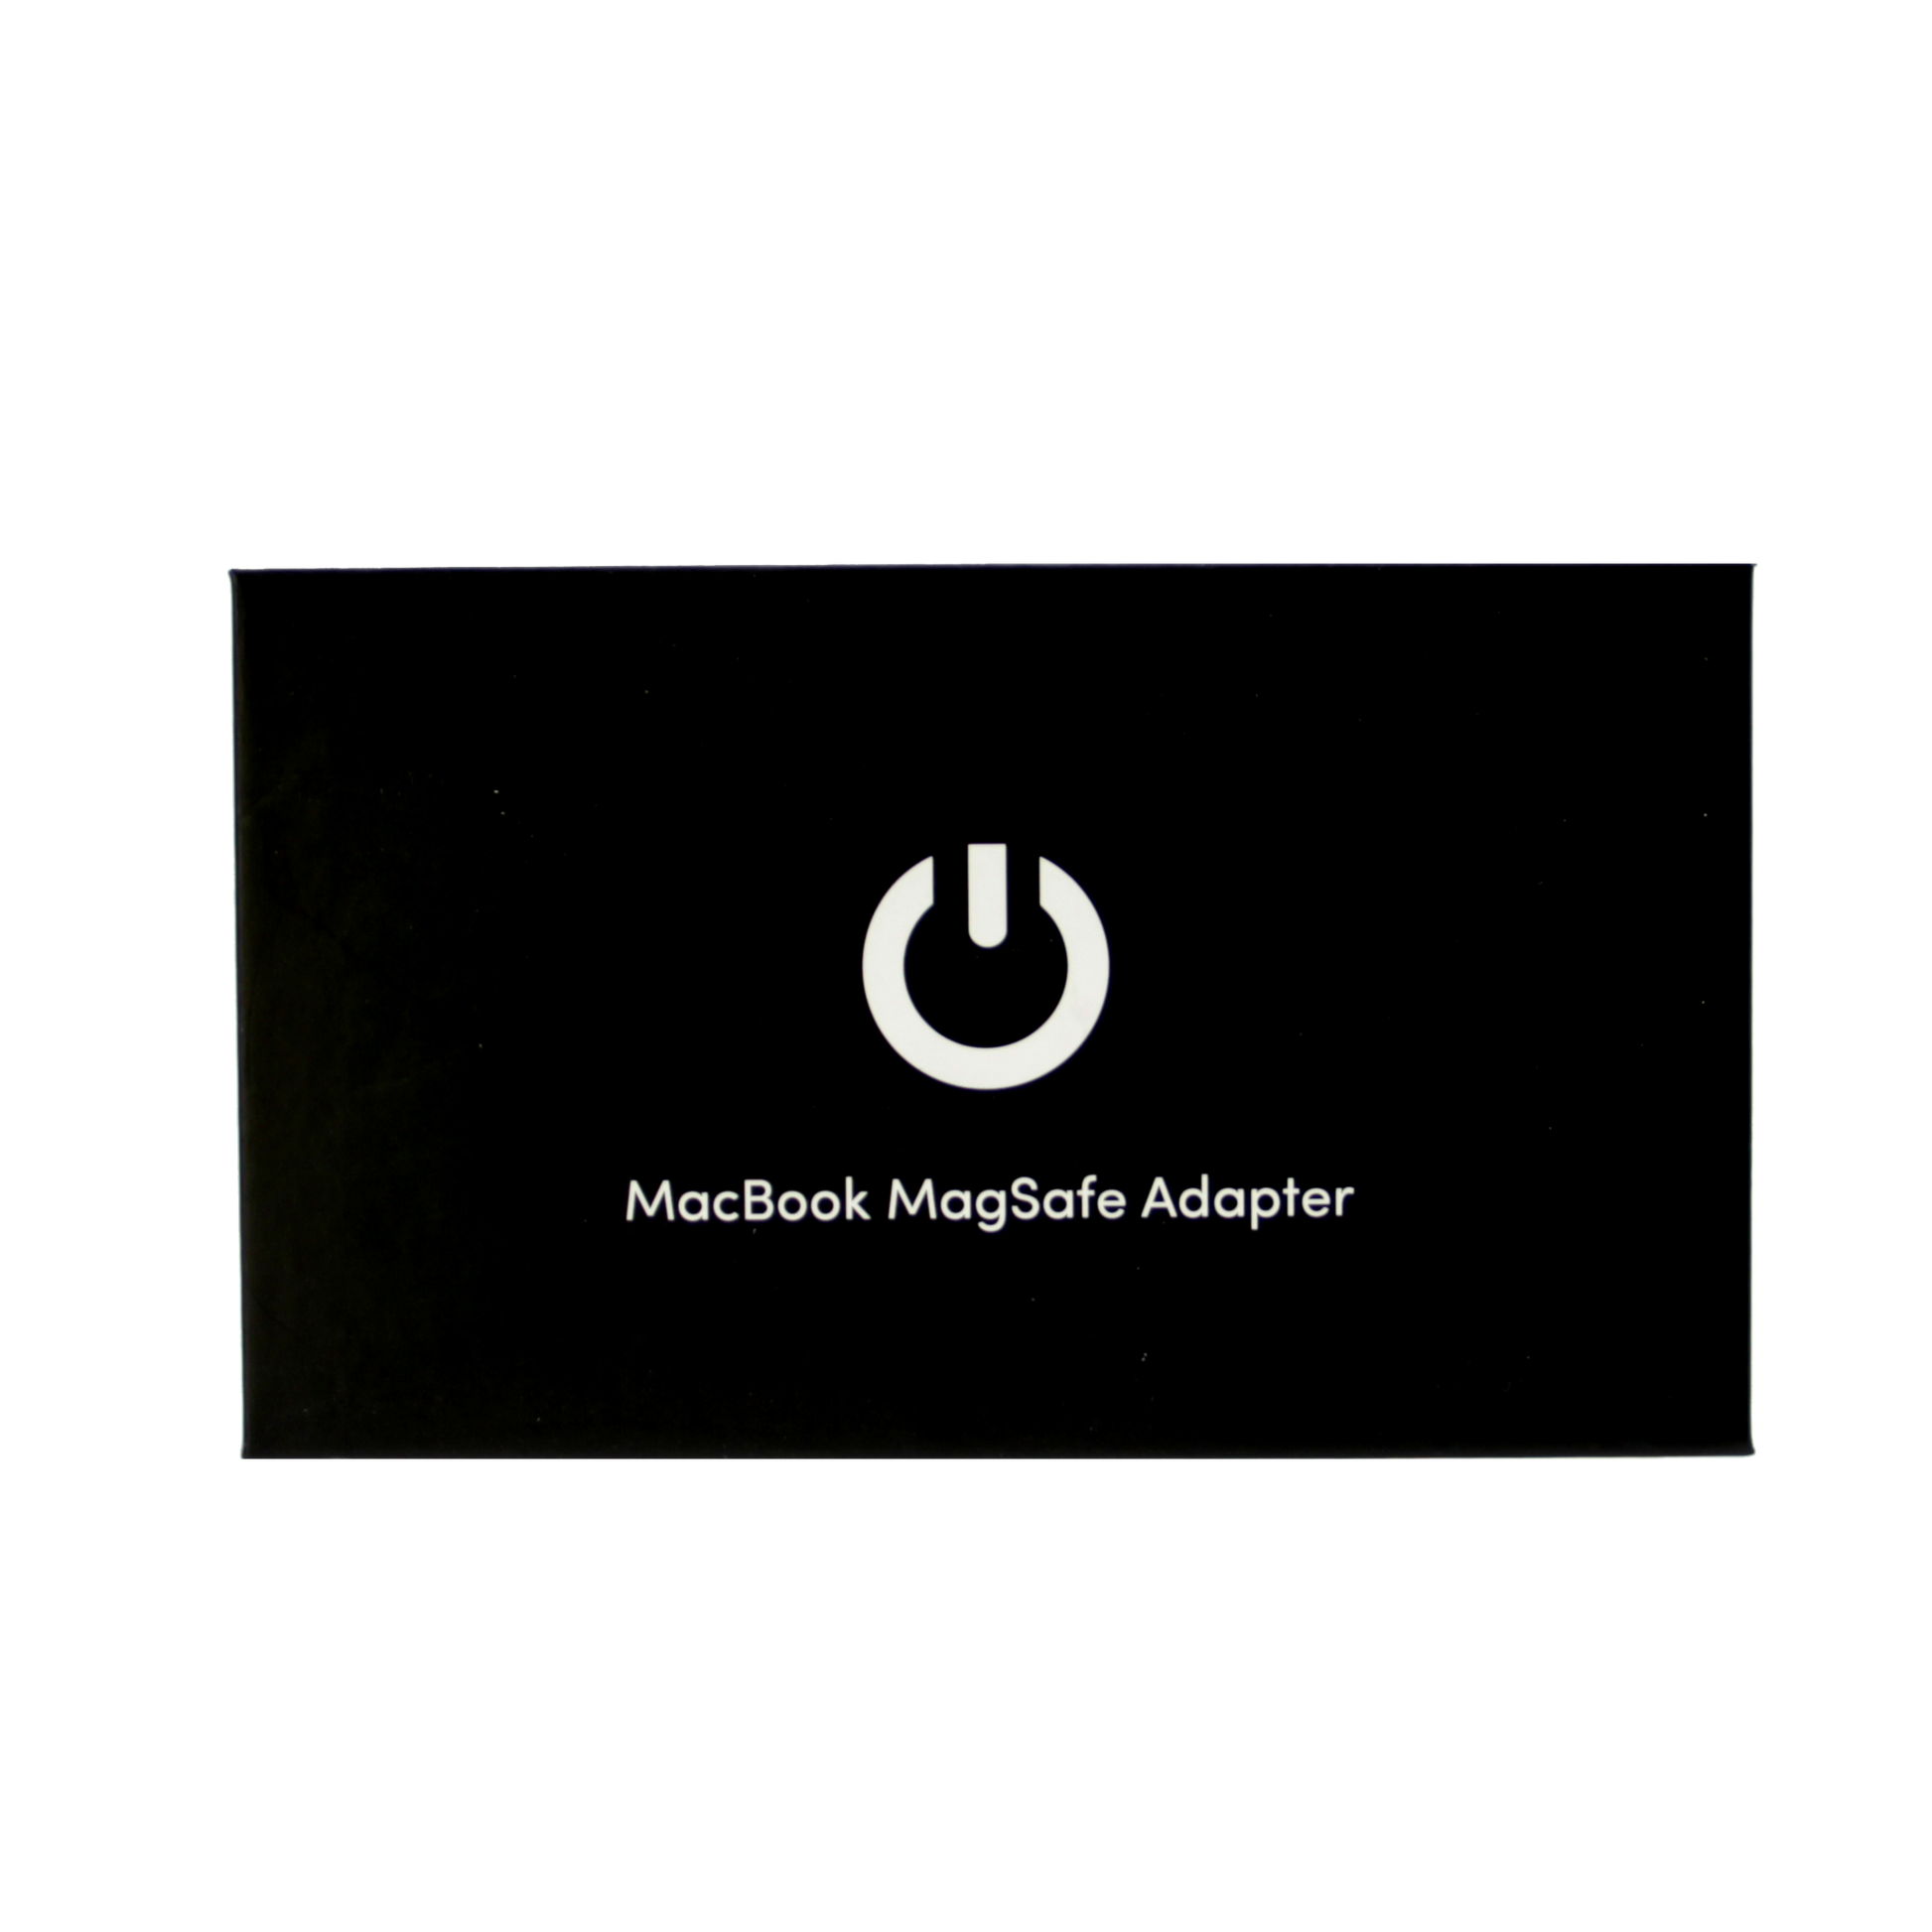 Refurbished Leapp Magsafe2 AC Adapter 60W